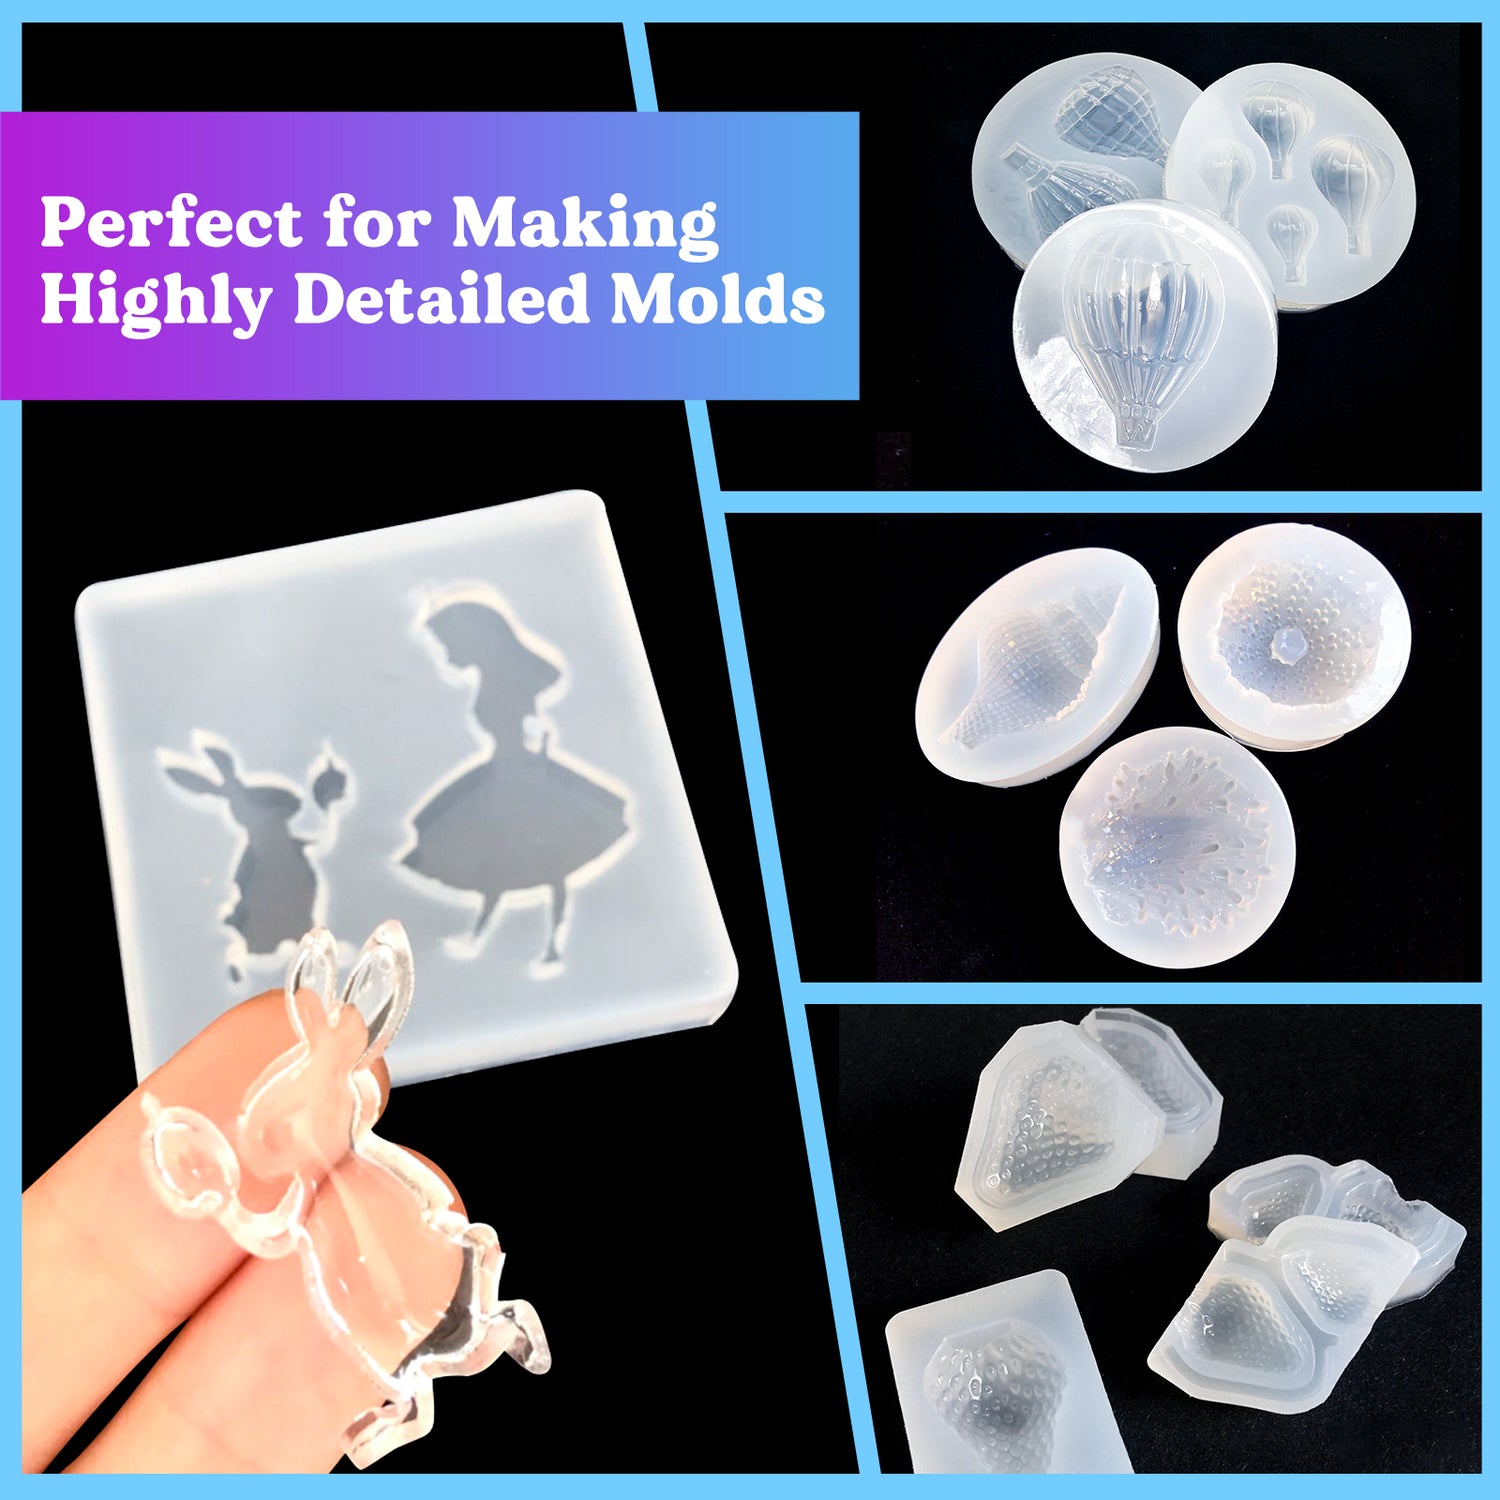  10 Oz Silicone Mold Kit, Food-Grade Silicone for Mold